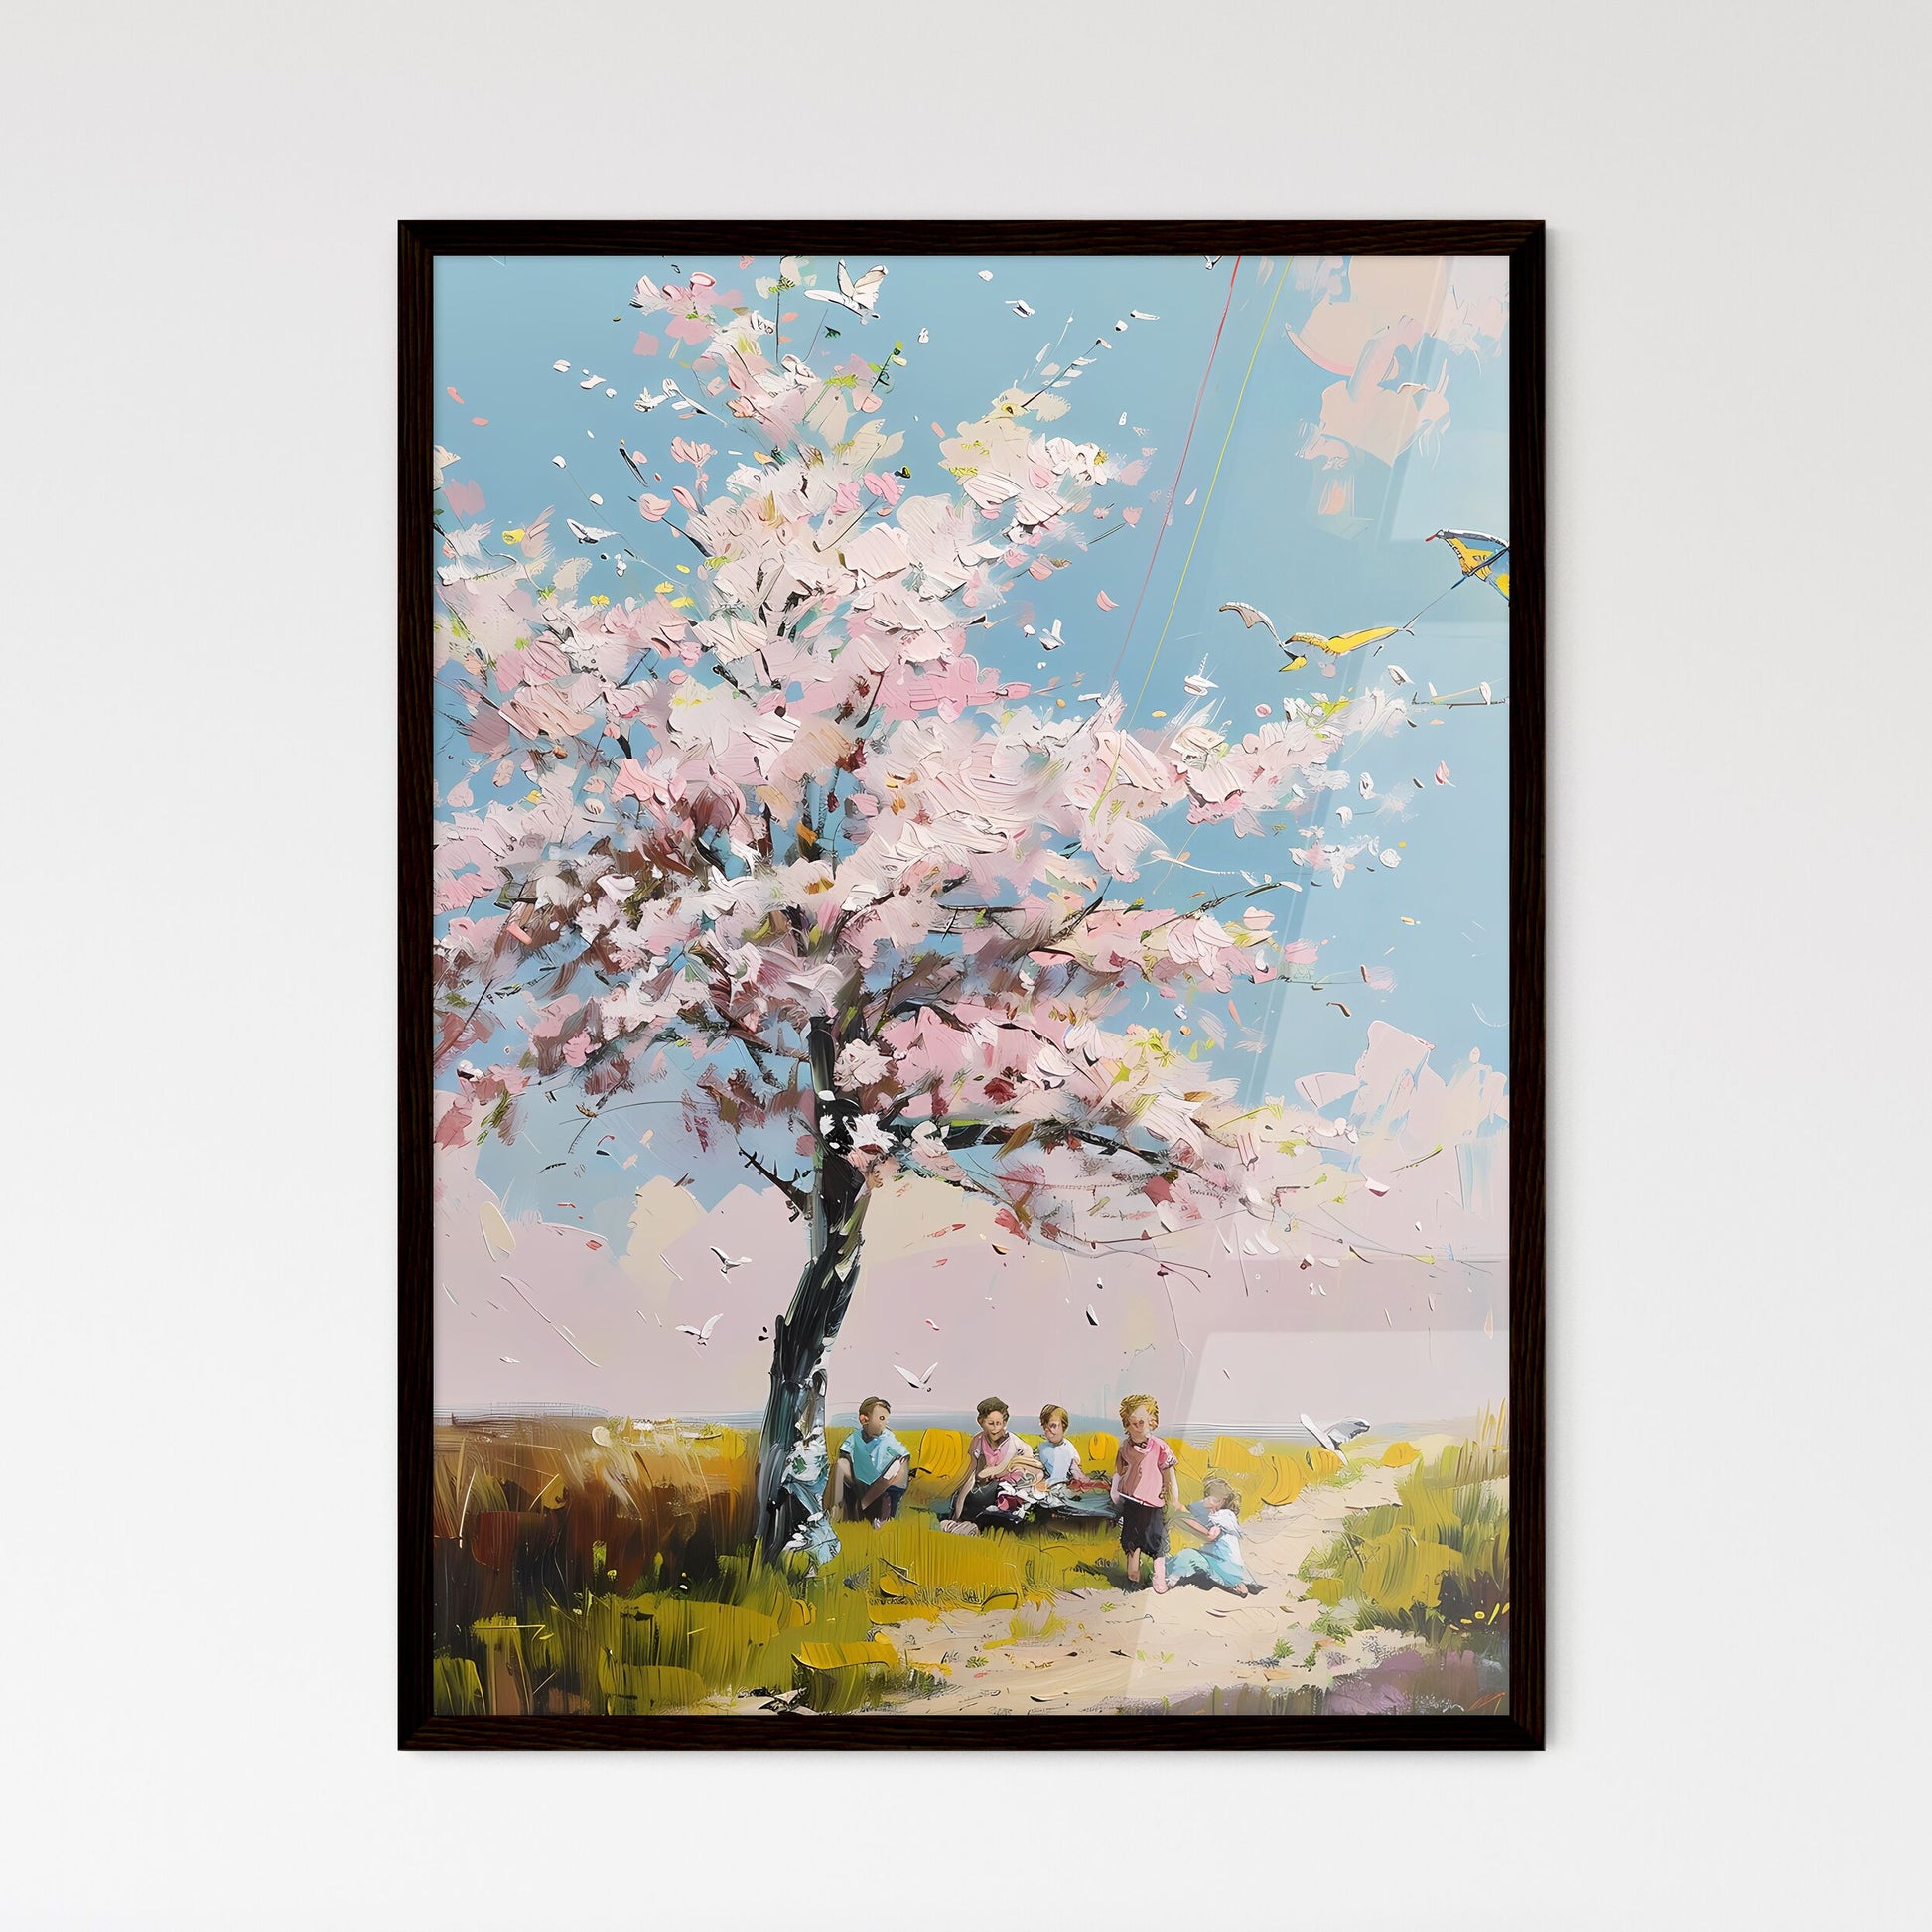 Impressionistic Spring Picnic Under Cherry Tree with Kite-Flying Children and Pink Blossoms Default Title